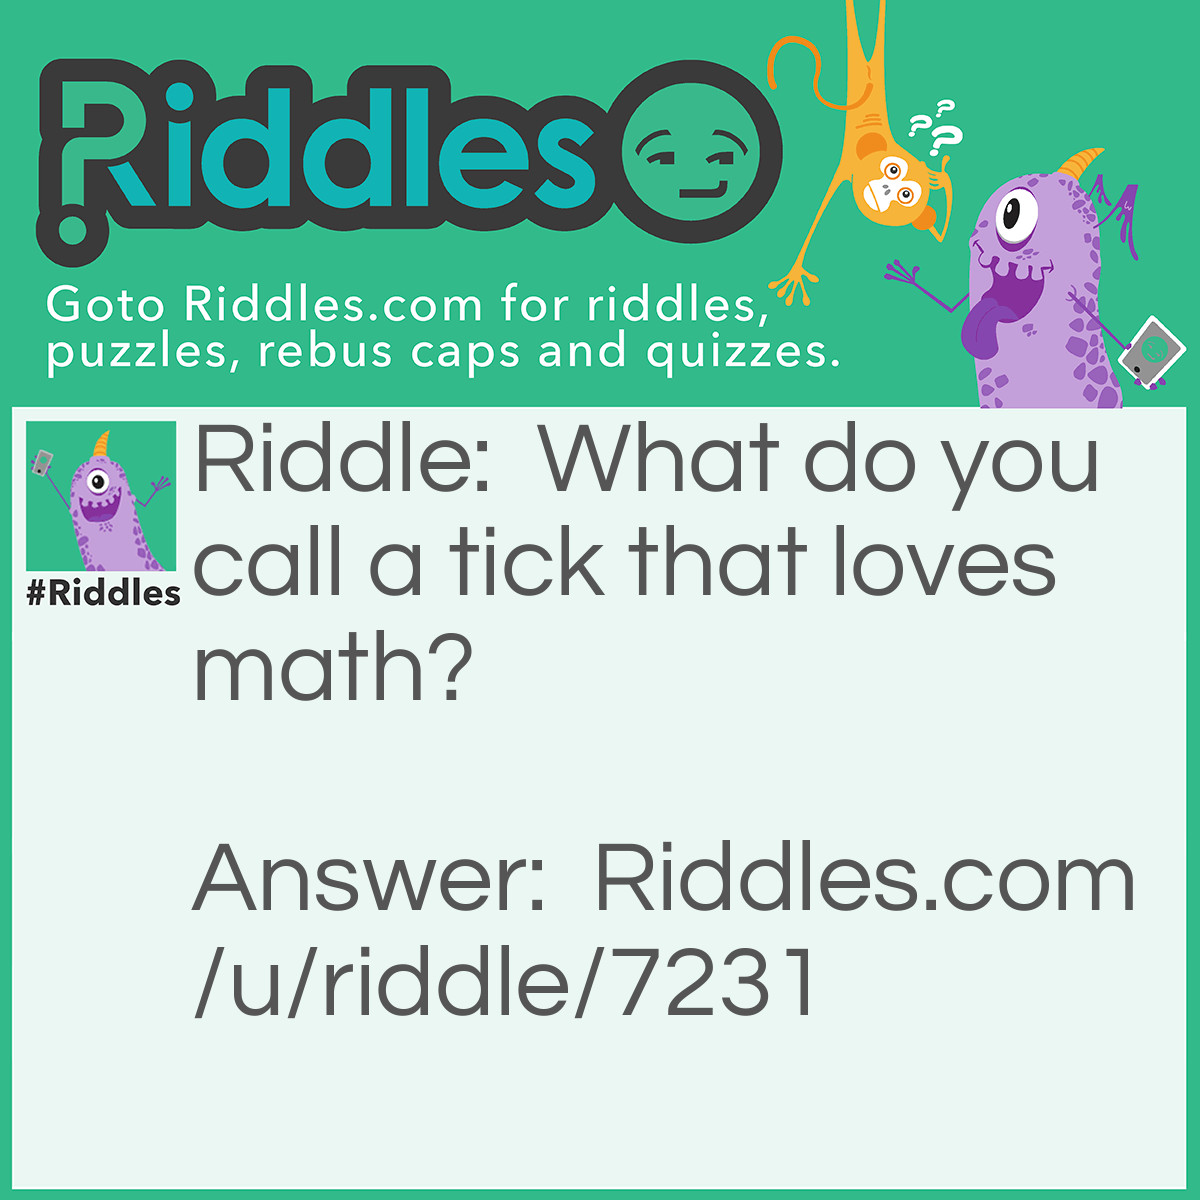 Riddle: What do you call a tick that loves math? Answer: An Arithmetic.